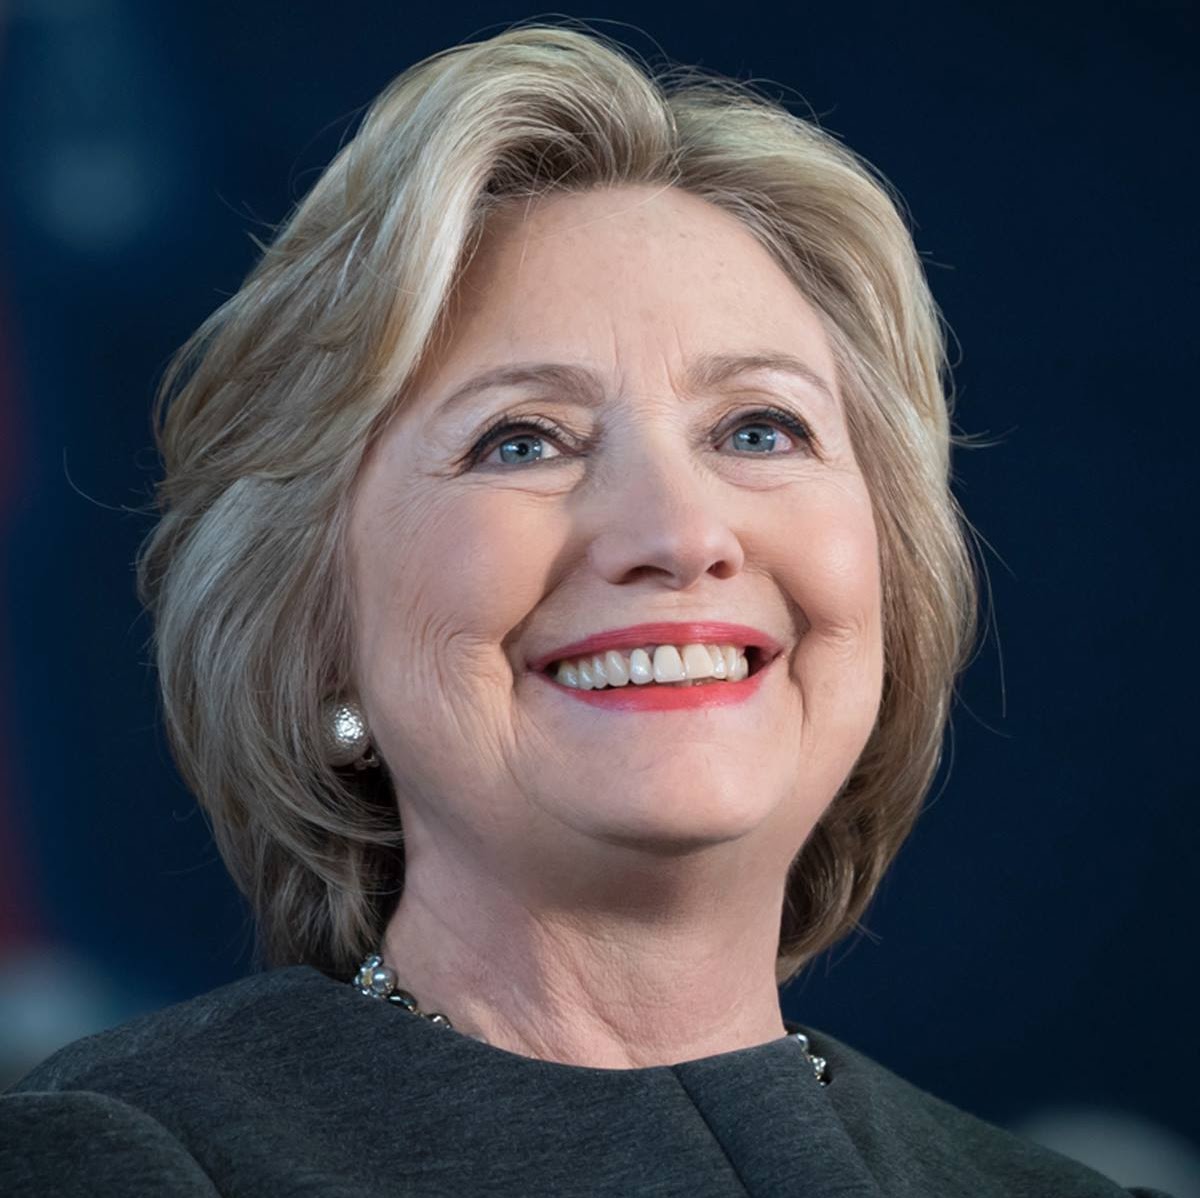 Hillary Clinton, 2016 Democratic Presidential Candidate